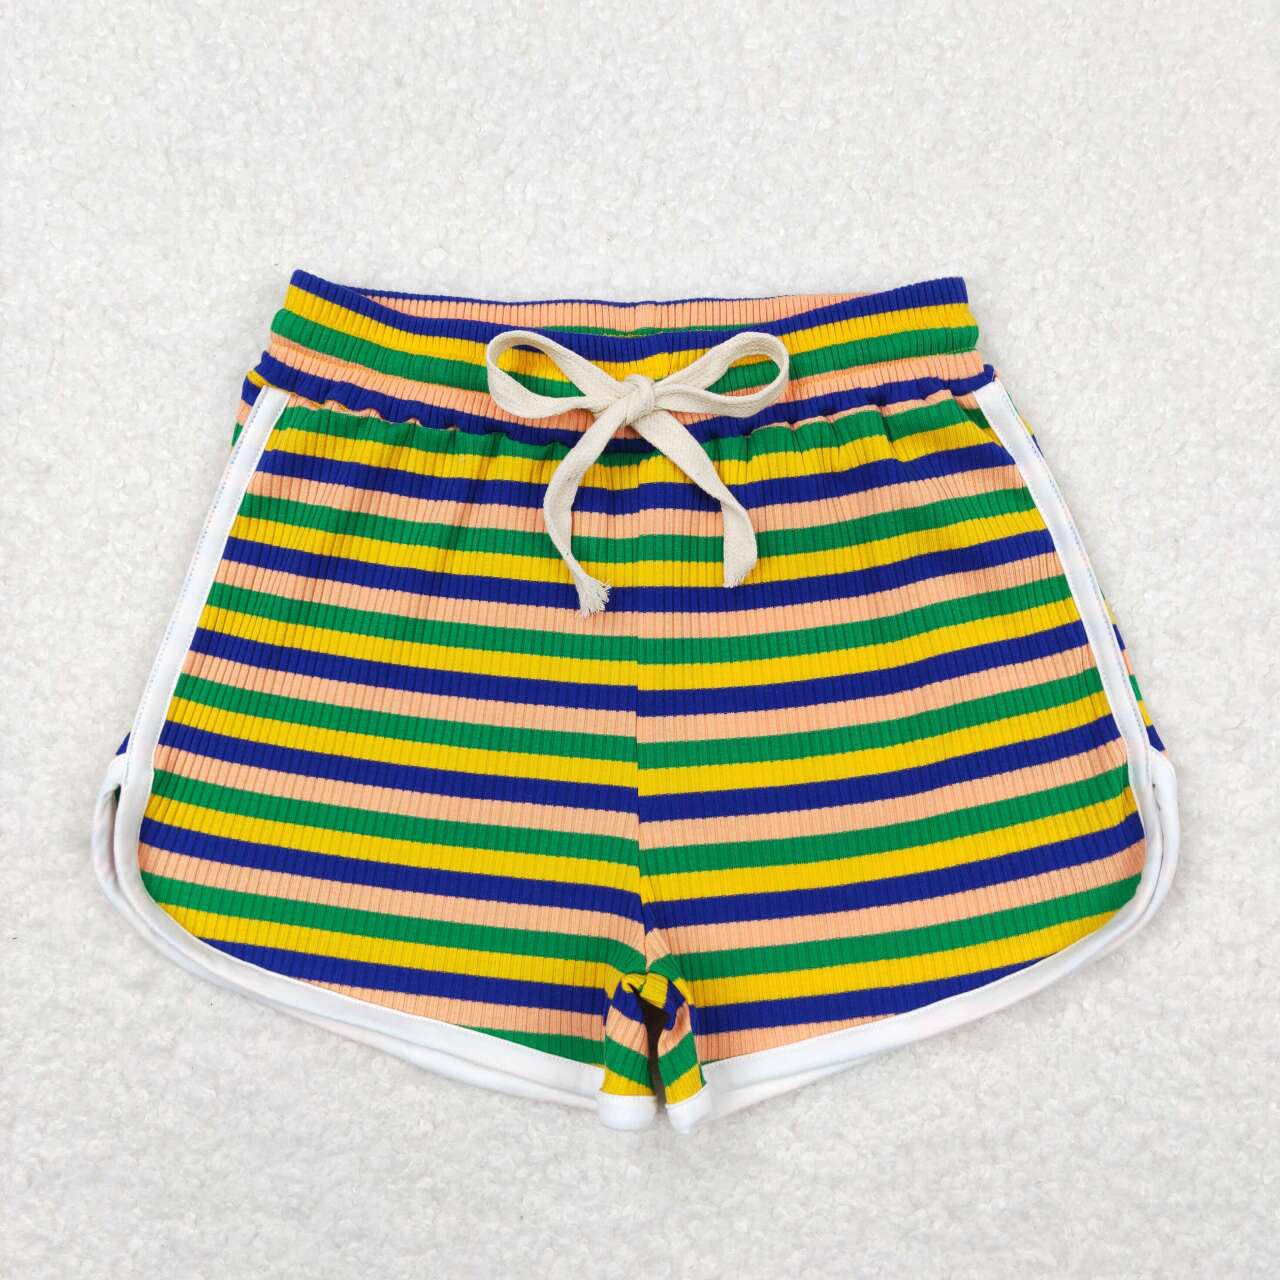 RTS SS0339Green, yellow, blue and orange colorful thick striped shorts